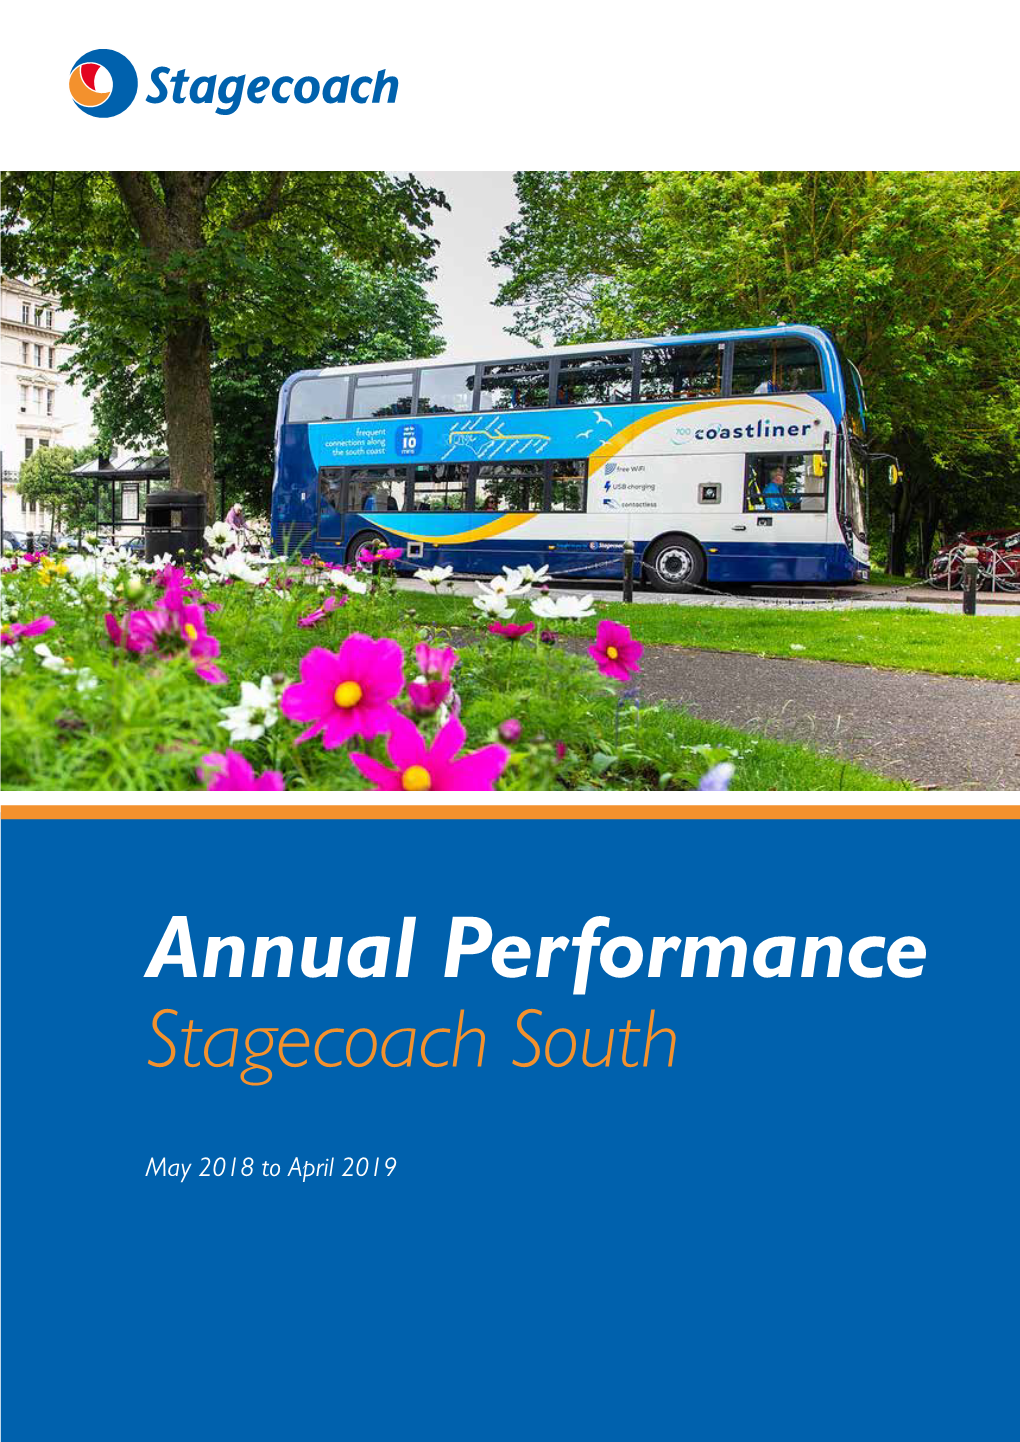 Annual Performance Stagecoach South